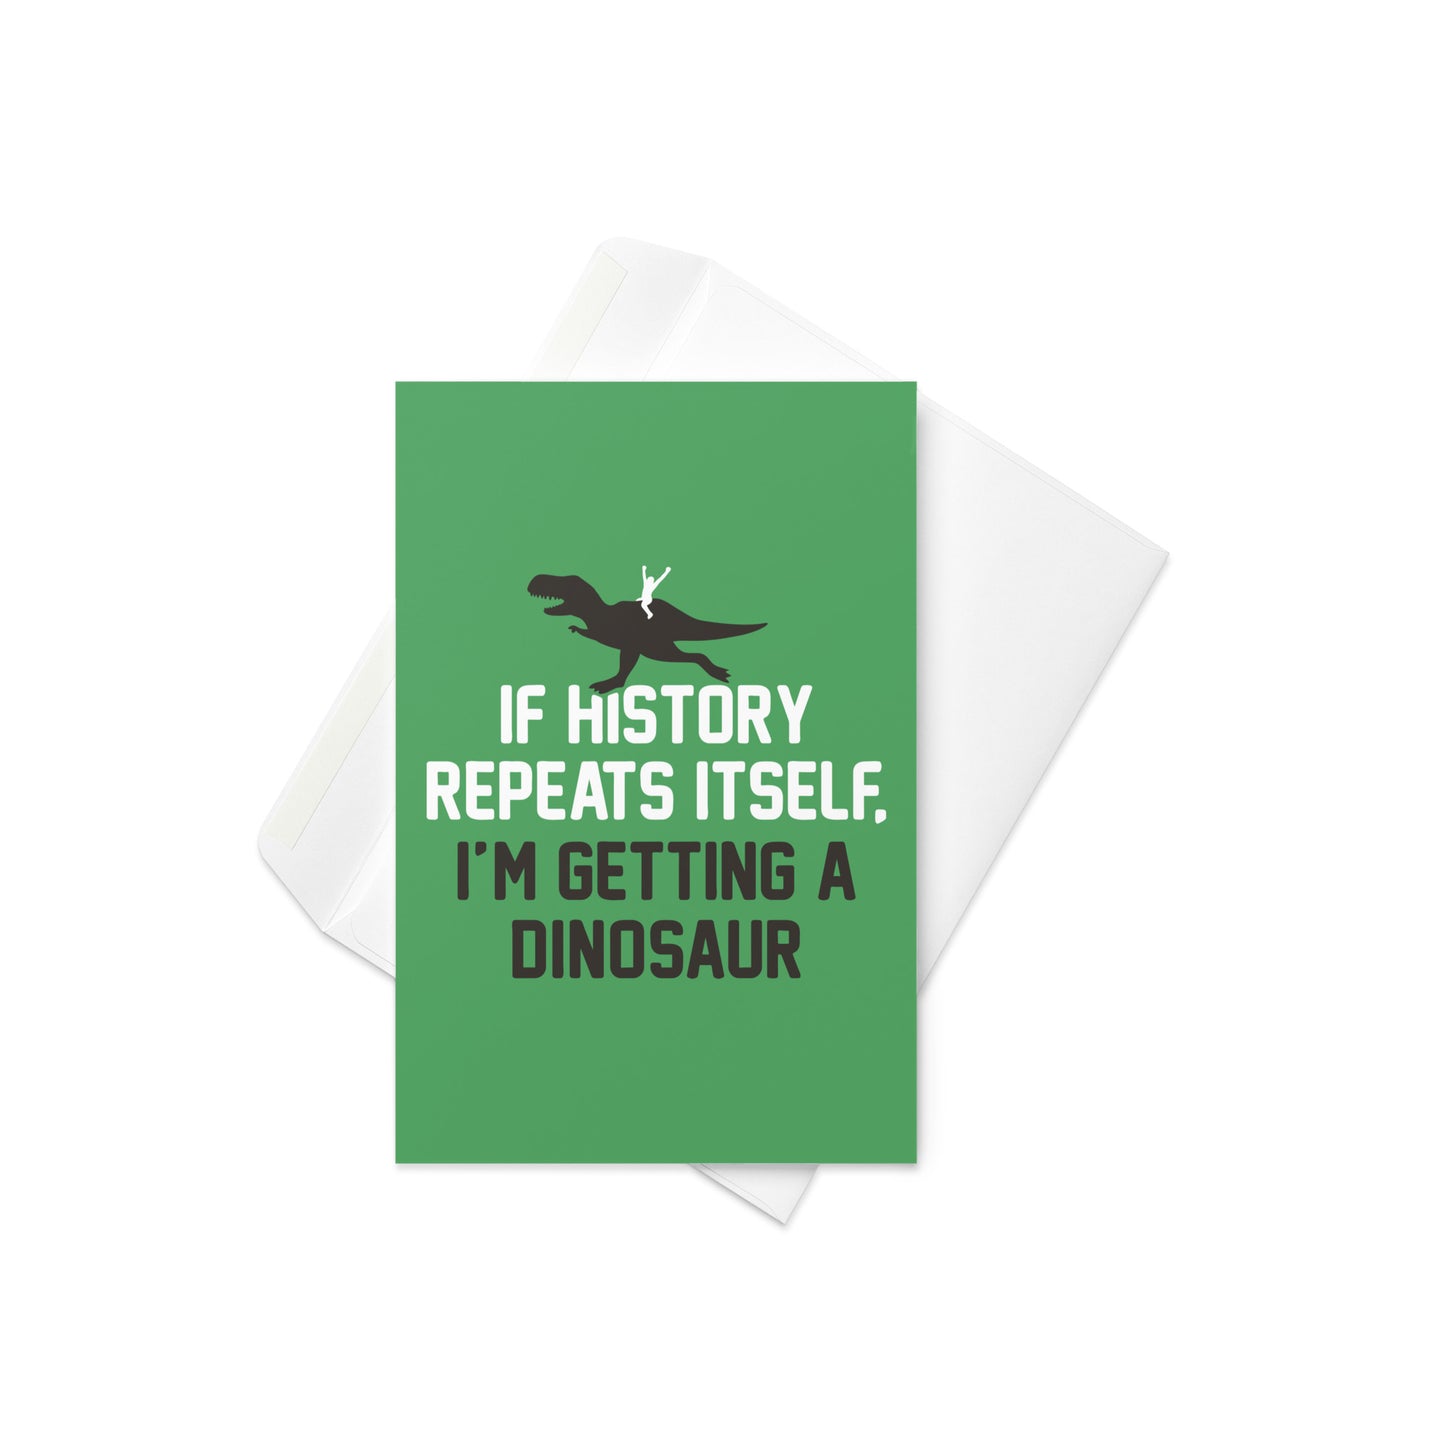 If History Repeats Itself, I'm Getting A Dinosaur Greeting Card